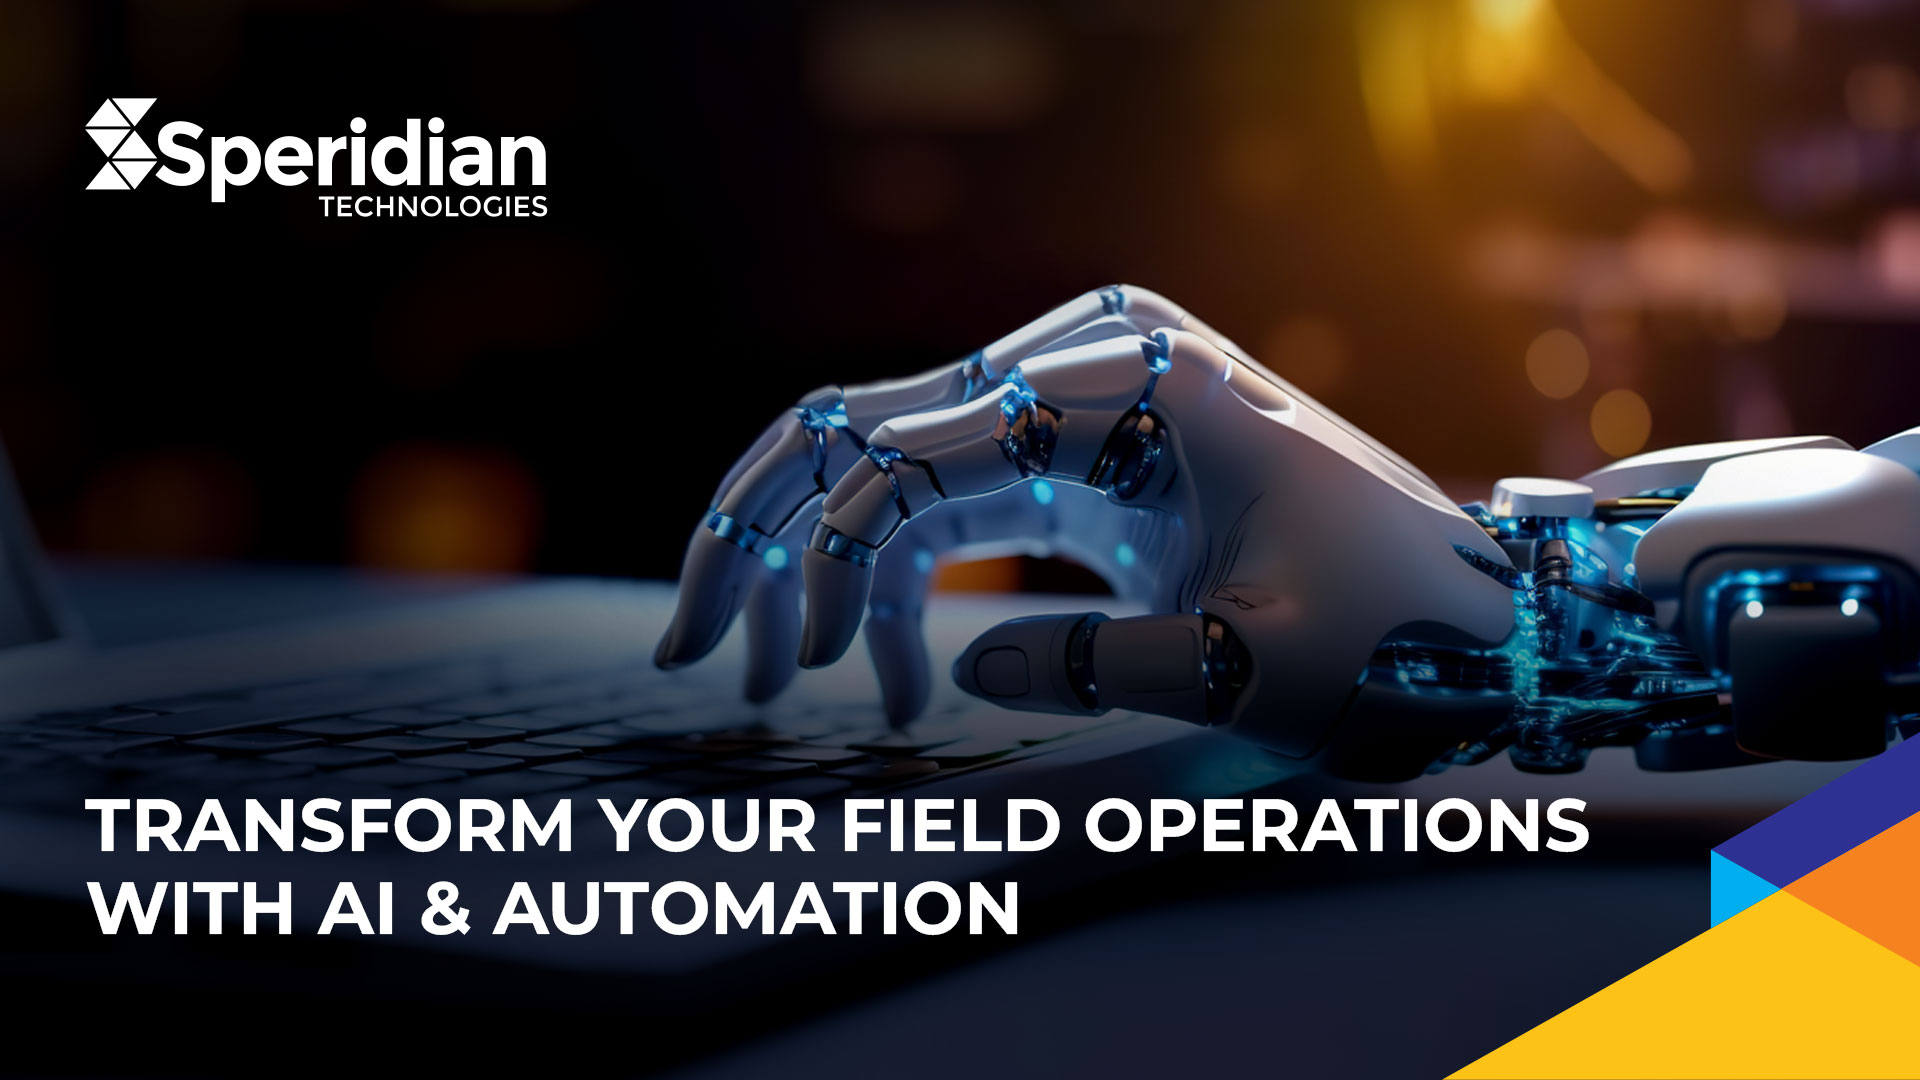 Transform Your Field Operations with AI & Automation